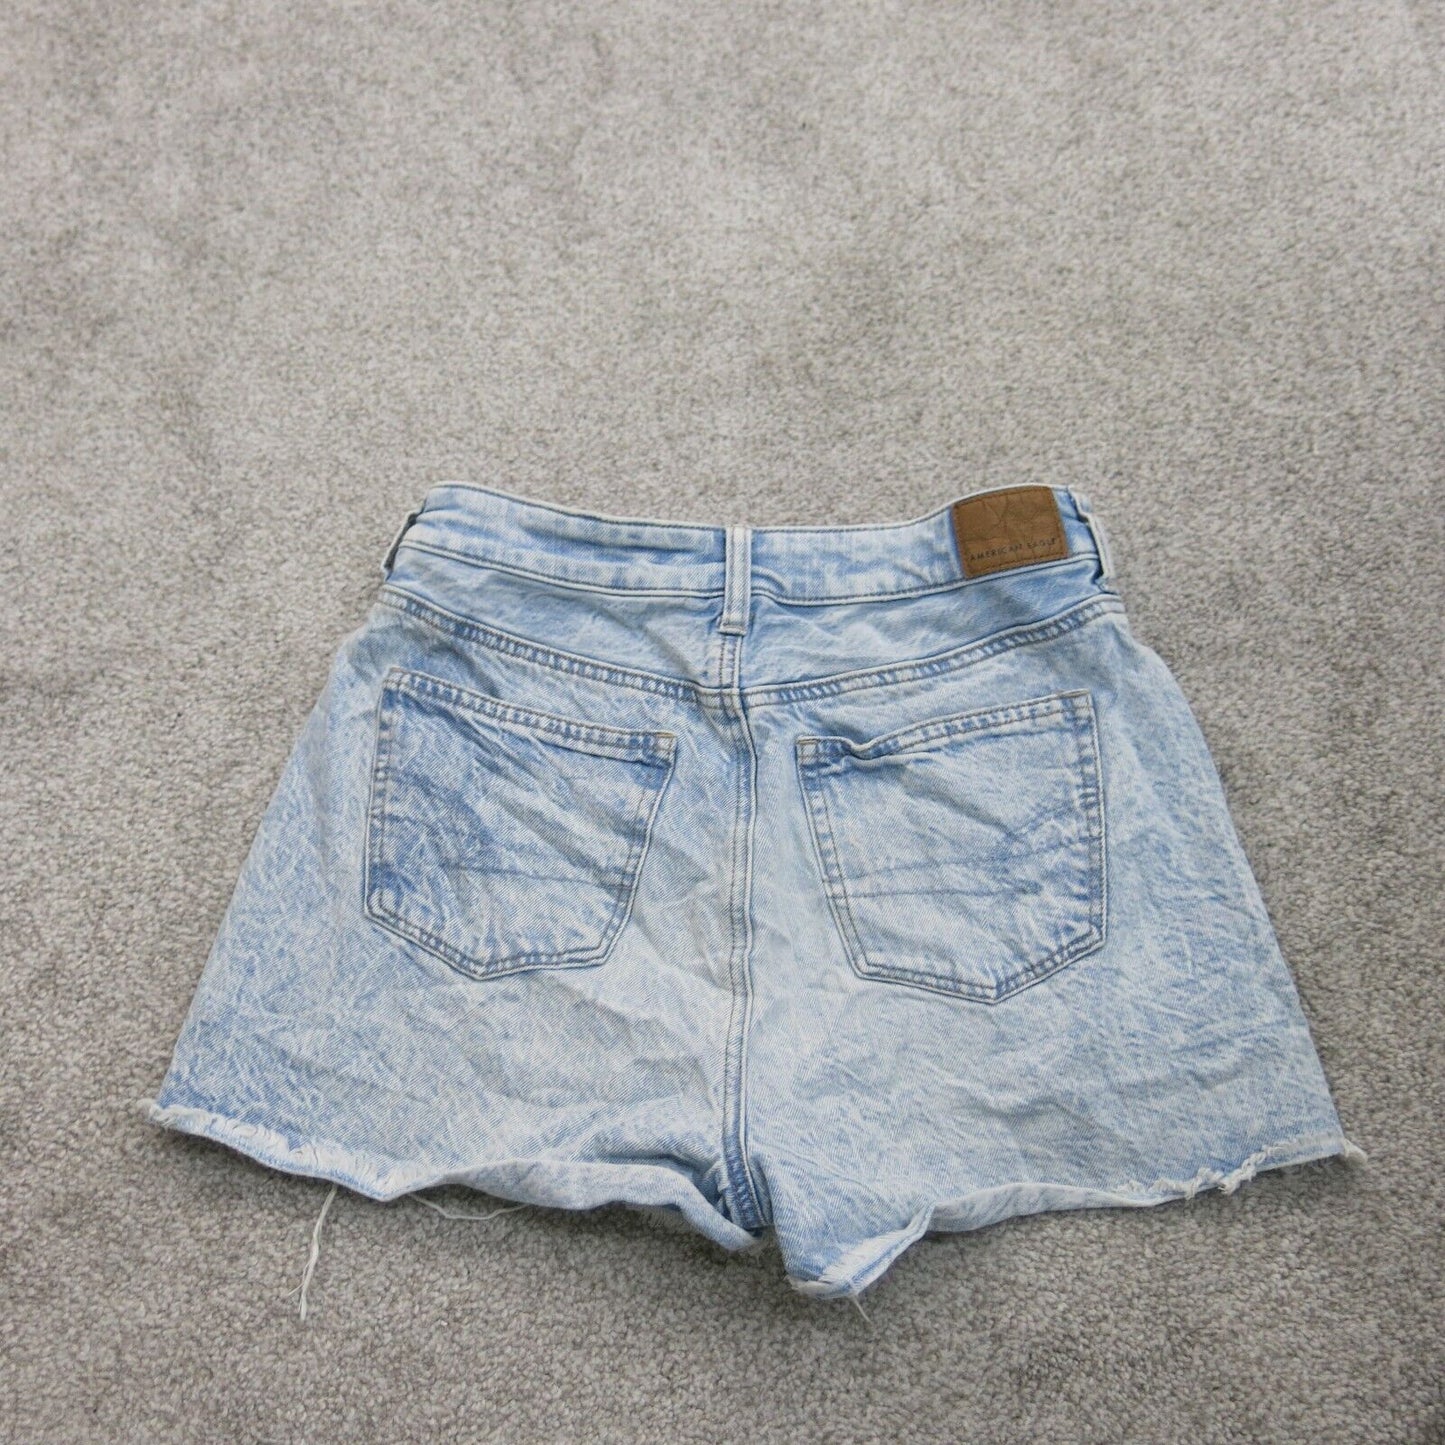 American Eagle Womens Cut Off Jeans Shorts Mid Rise Comfort Stretch Blue Size 4